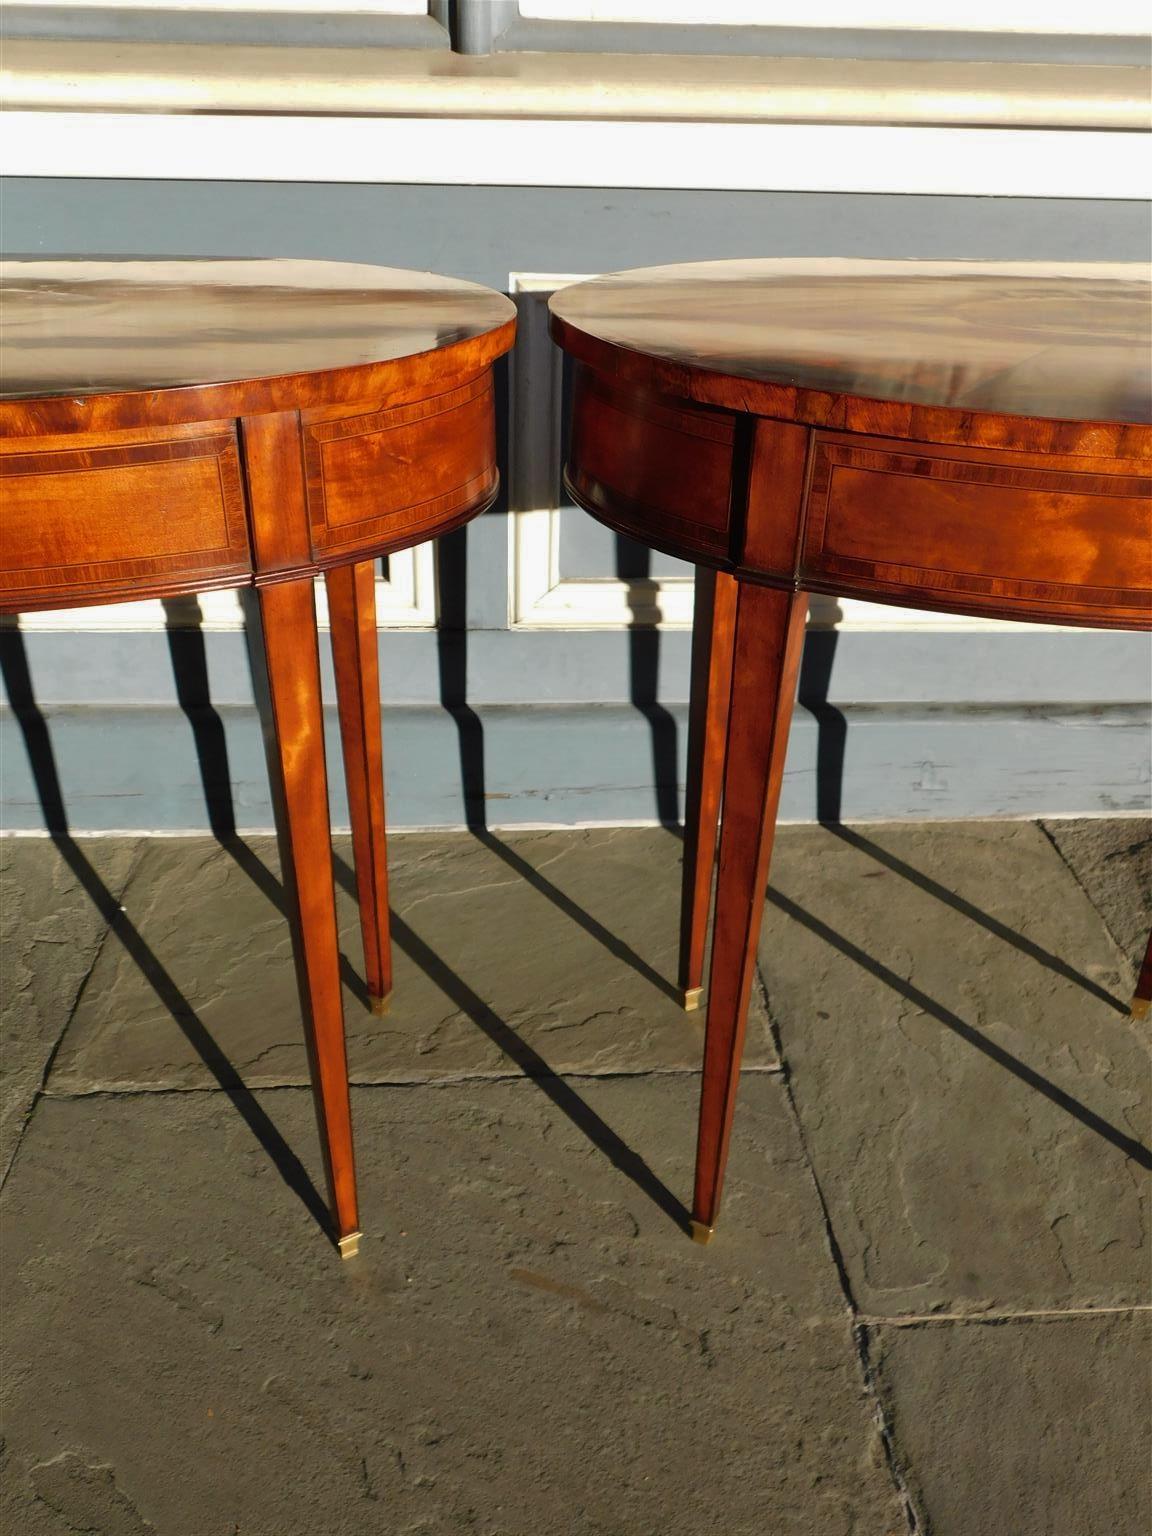 Pair of English Oval Satinwood & Ebony Inlay Flower Basket Console Tables C 1840 For Sale 4